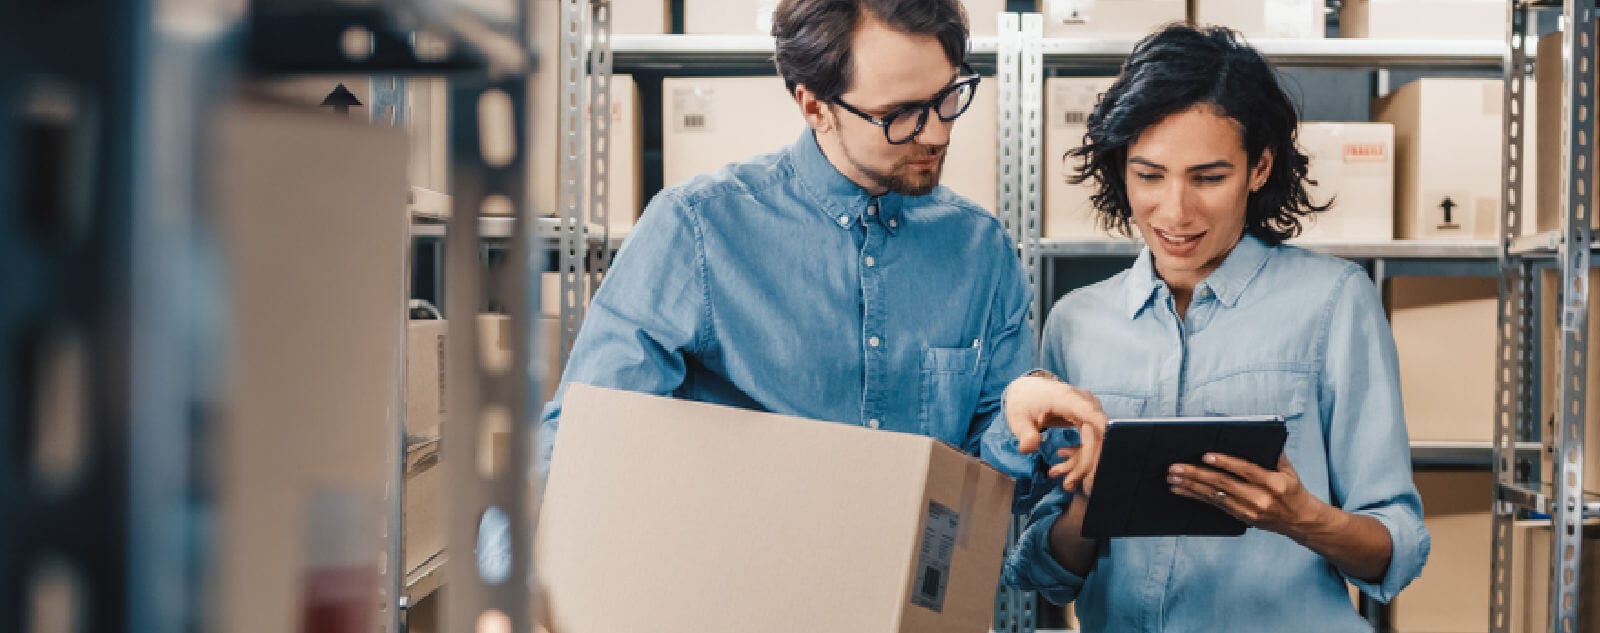 Inventory Turnover Ratio: What Is It & How to Calculate It